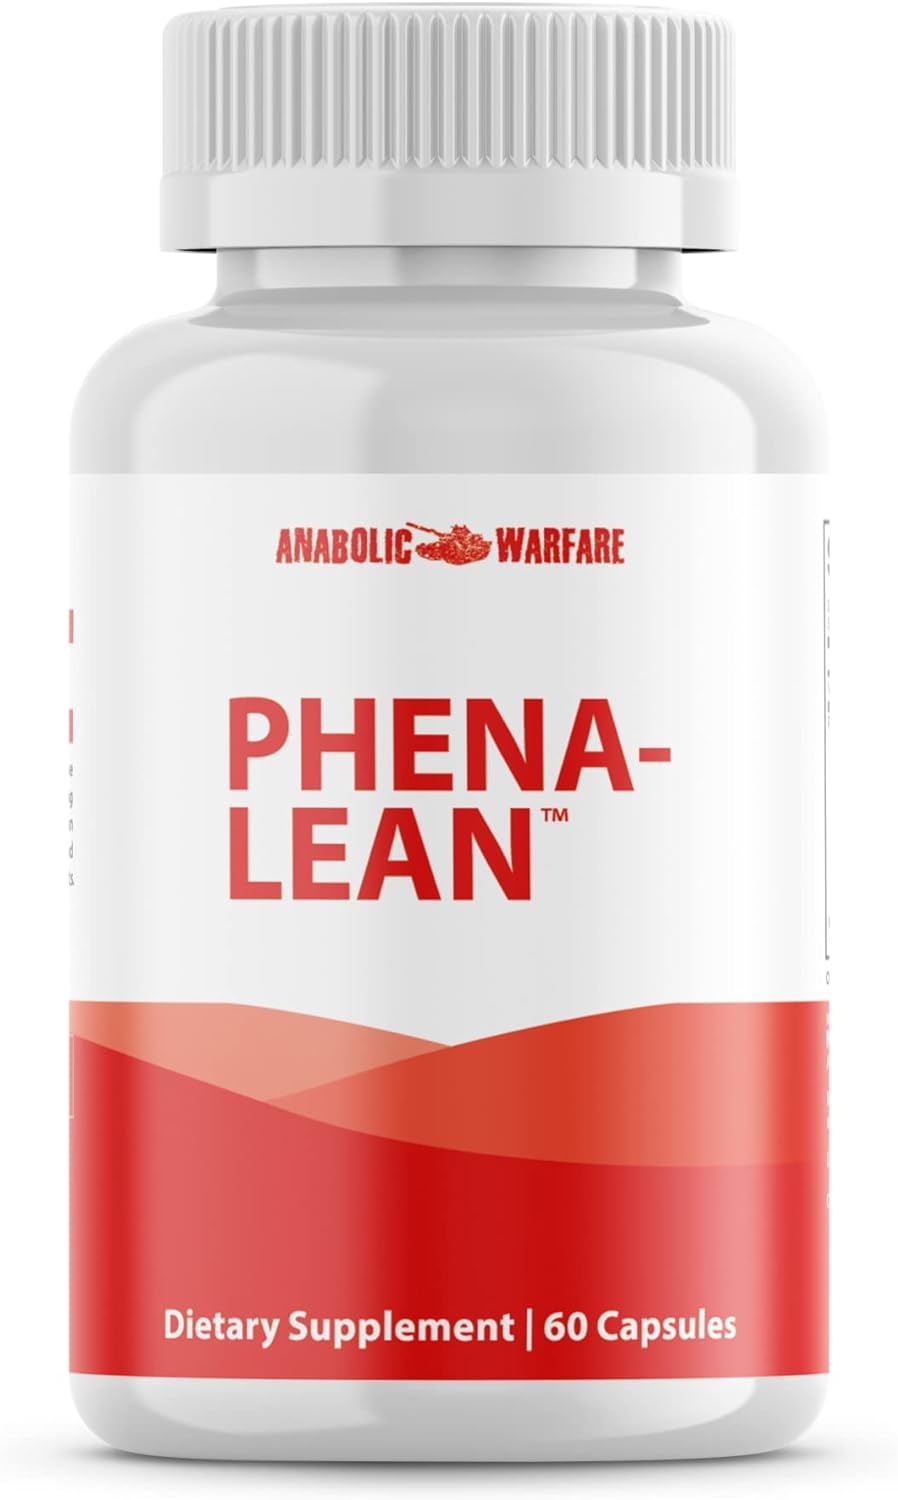 Anabolic Warfare Phena-Lean Premier Supplement from Thermogenic Body Composition Supplement – Fuel Your Fire, Supports Energy and Focus* - 60 Capsules.